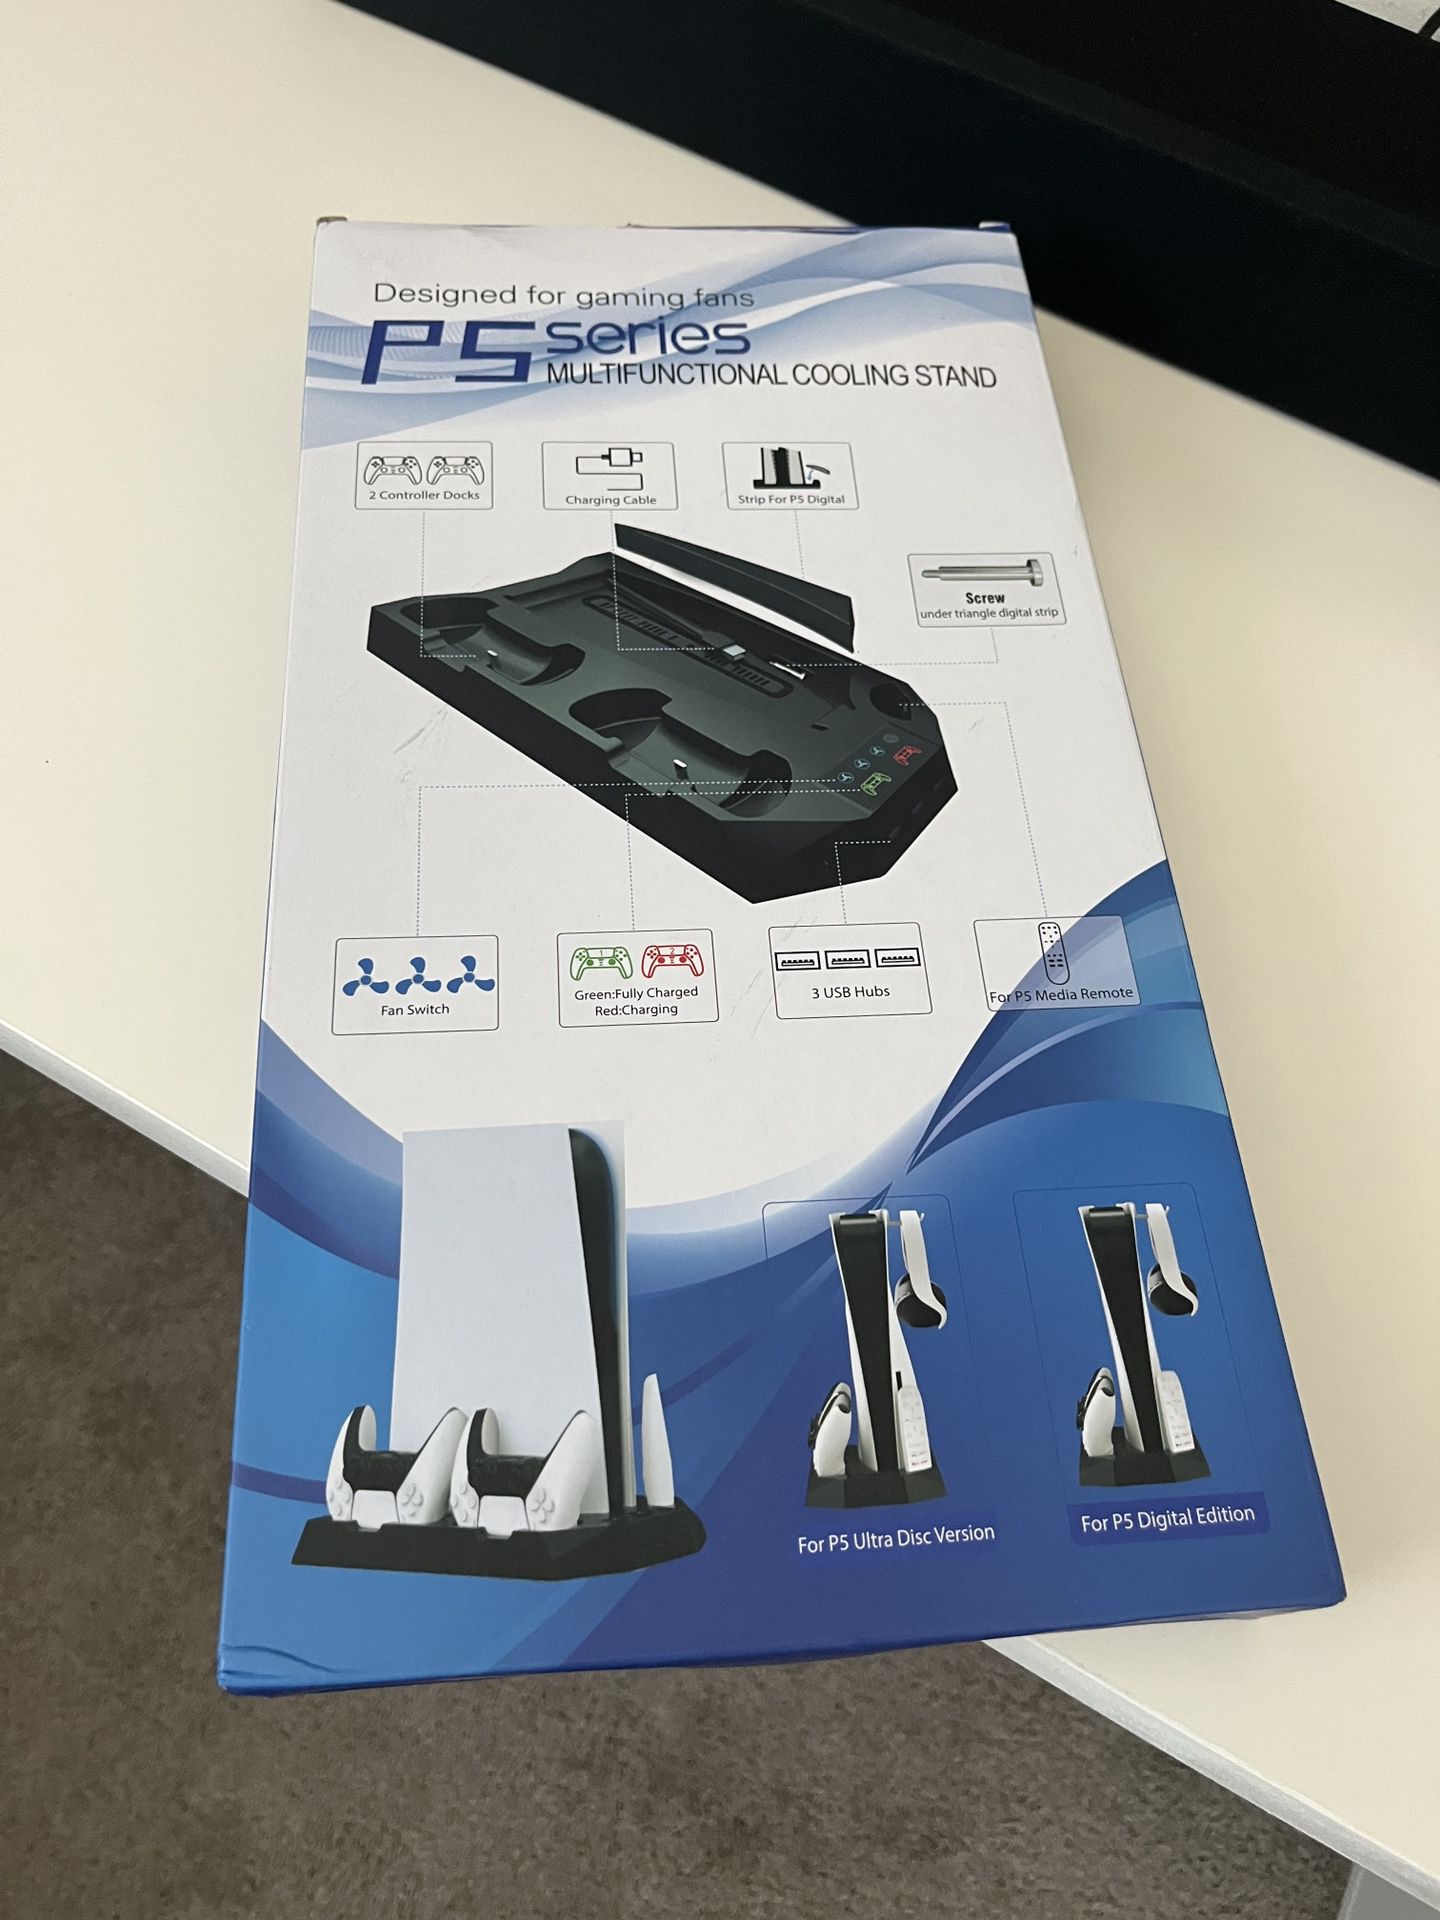 PS5 STAND WITH COOLING STATION AND DUAL CONTROLLER CHARGING STATION FOR PS5 DIGITAL EDITION WHITE  jCOLOR IS MISSING THE HEADSET HOLDER